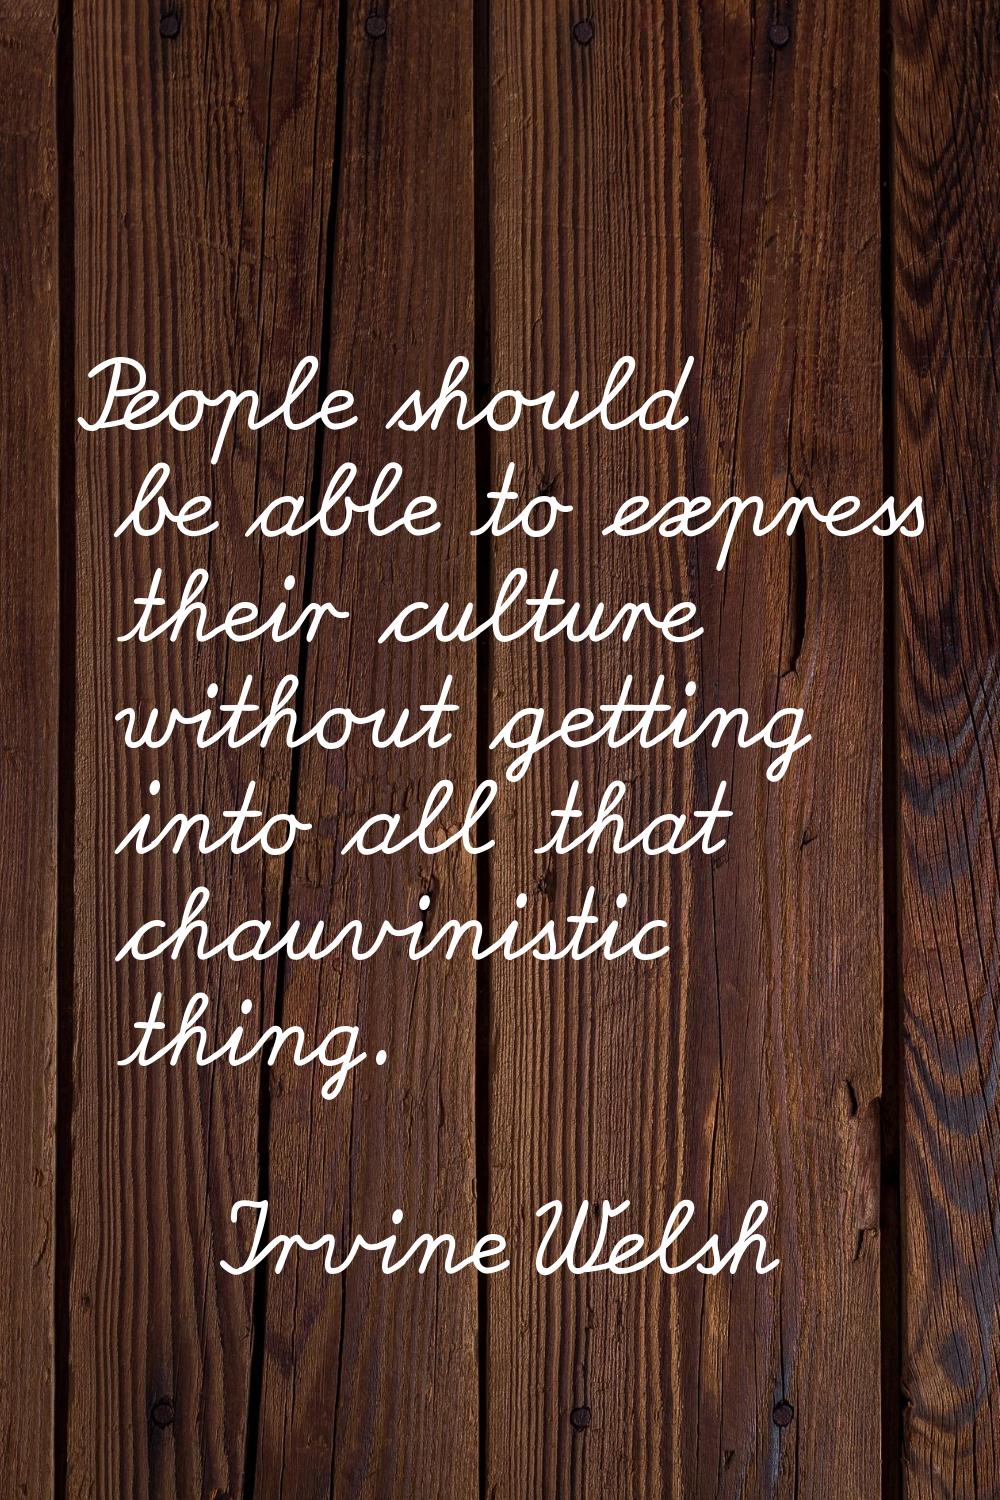 People should be able to express their culture without getting into all that chauvinistic thing.